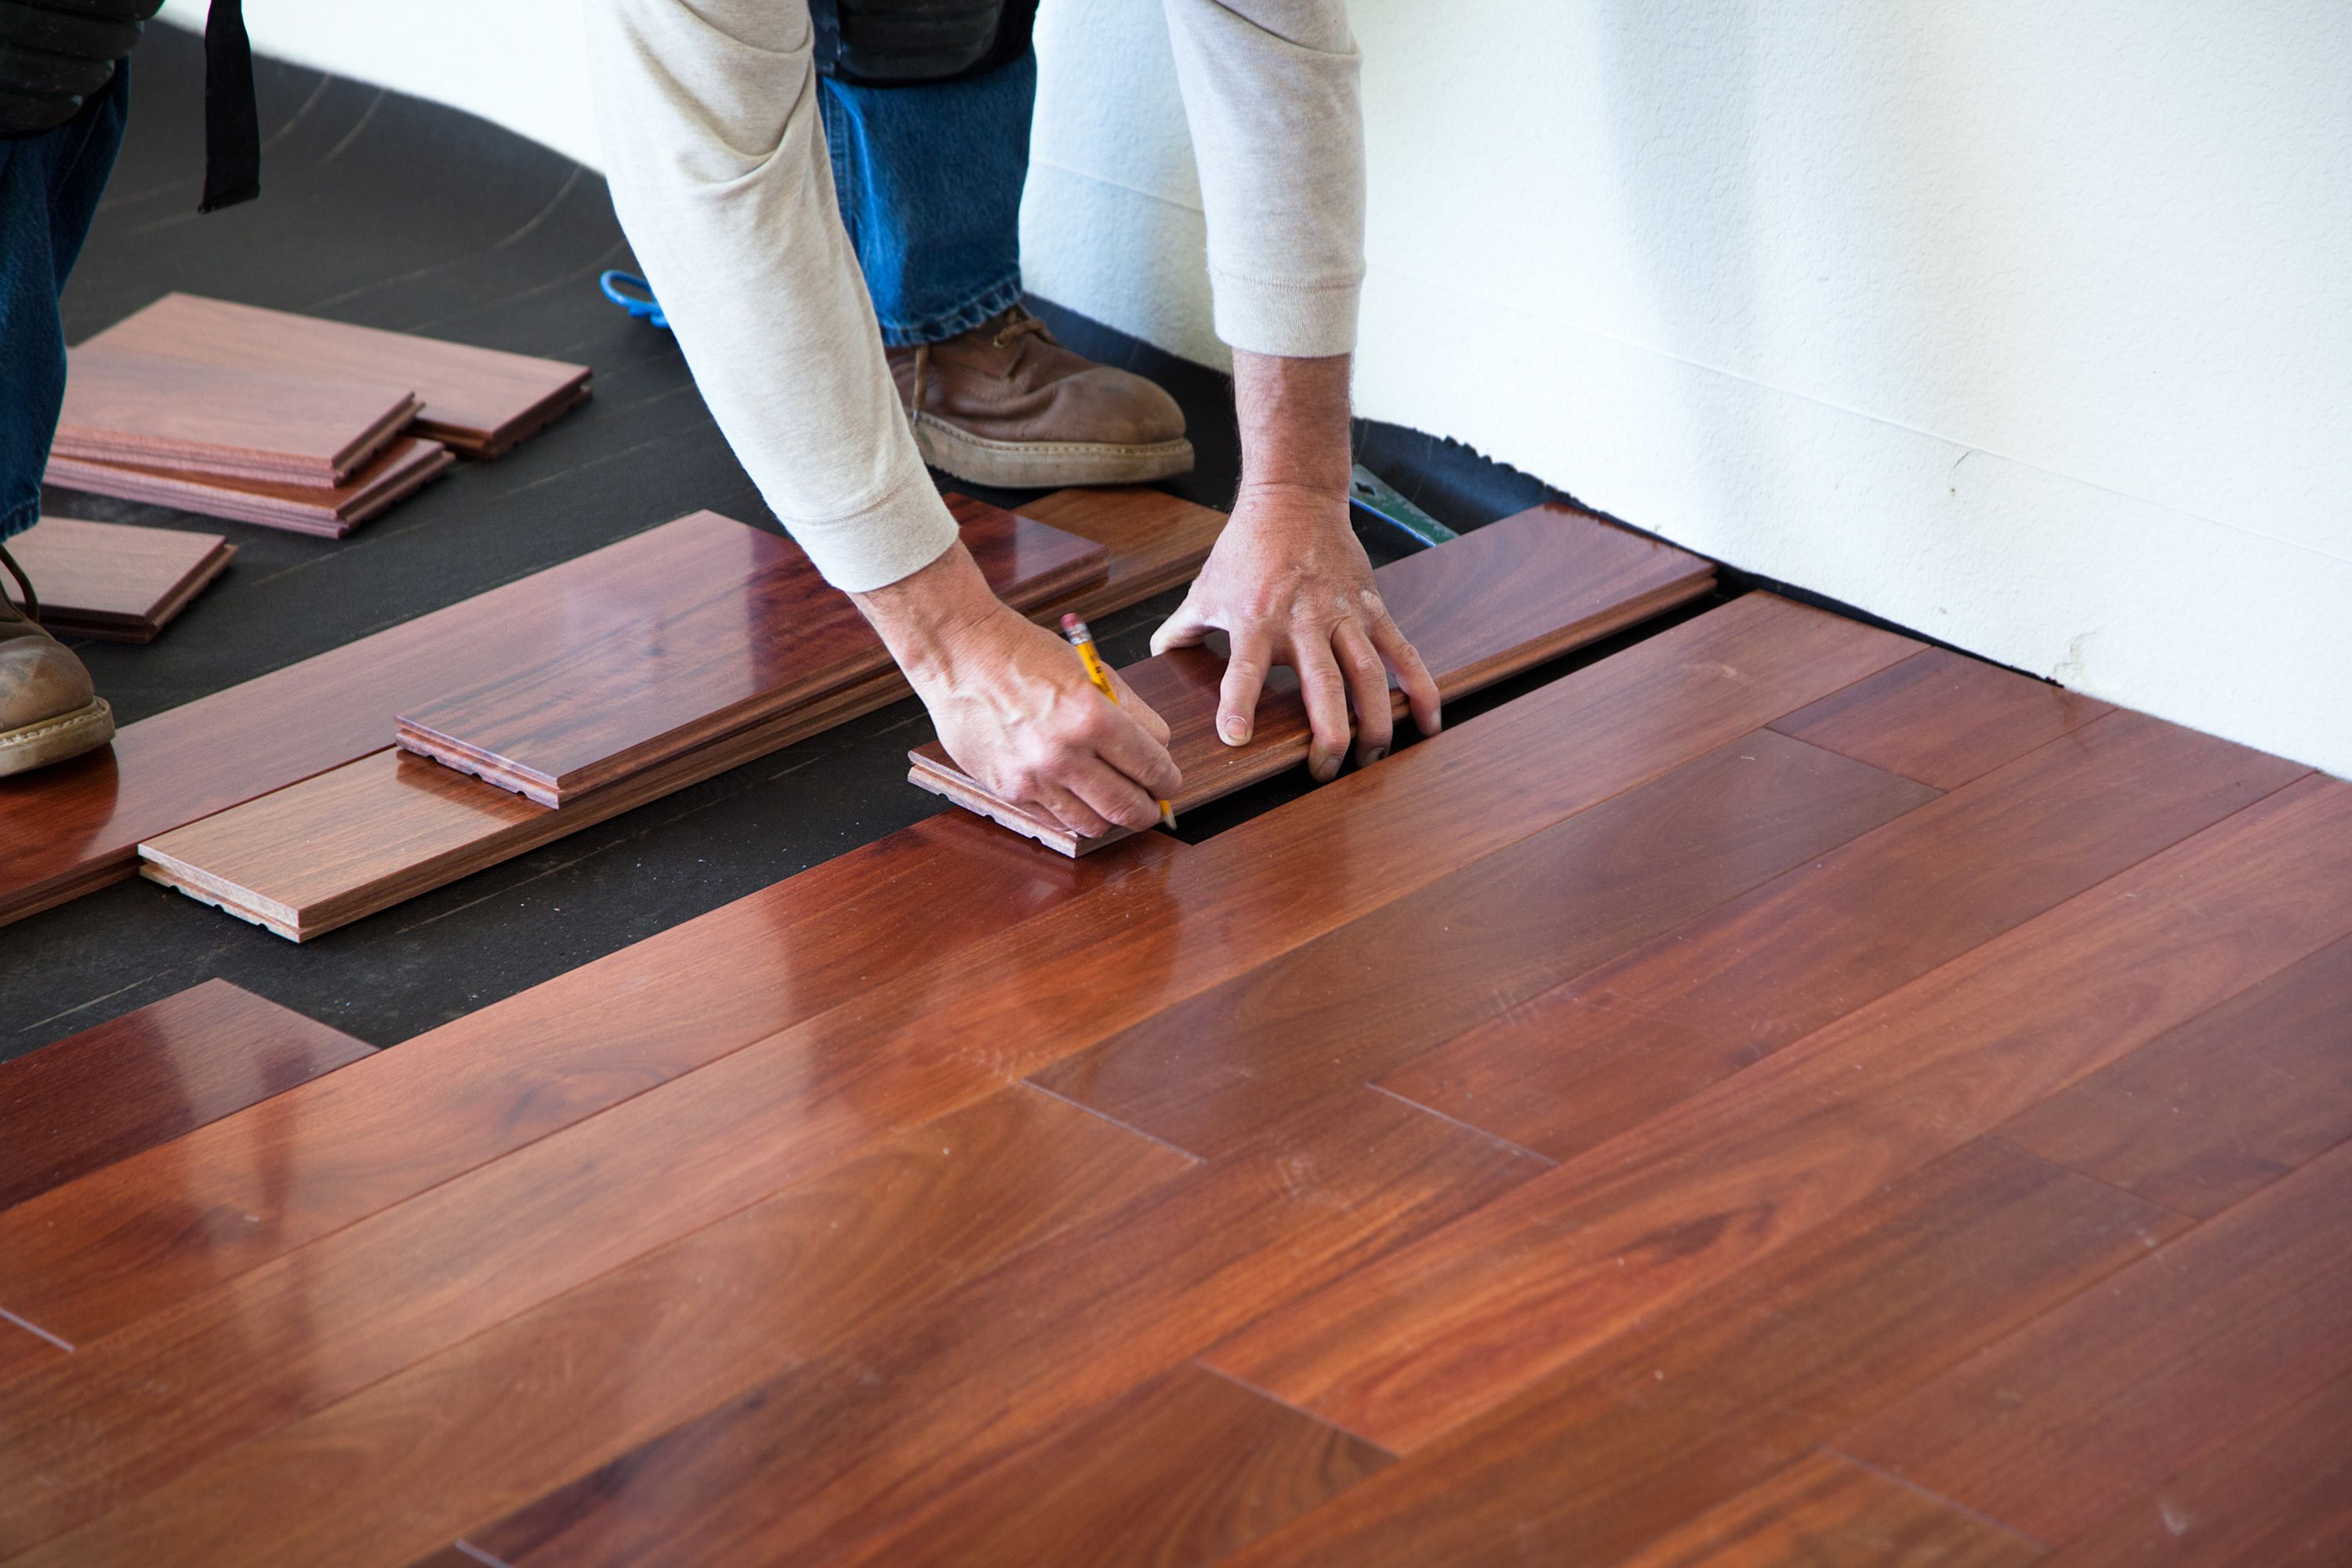 17 Stunning Durability Of Laminate Flooring Vs Hardwood 2024 free download durability of laminate flooring vs hardwood of wood laminate flooring vs hardwood the subfloor is the foundation of inside wood laminate flooring vs hardwood the subfloor is the foundation o